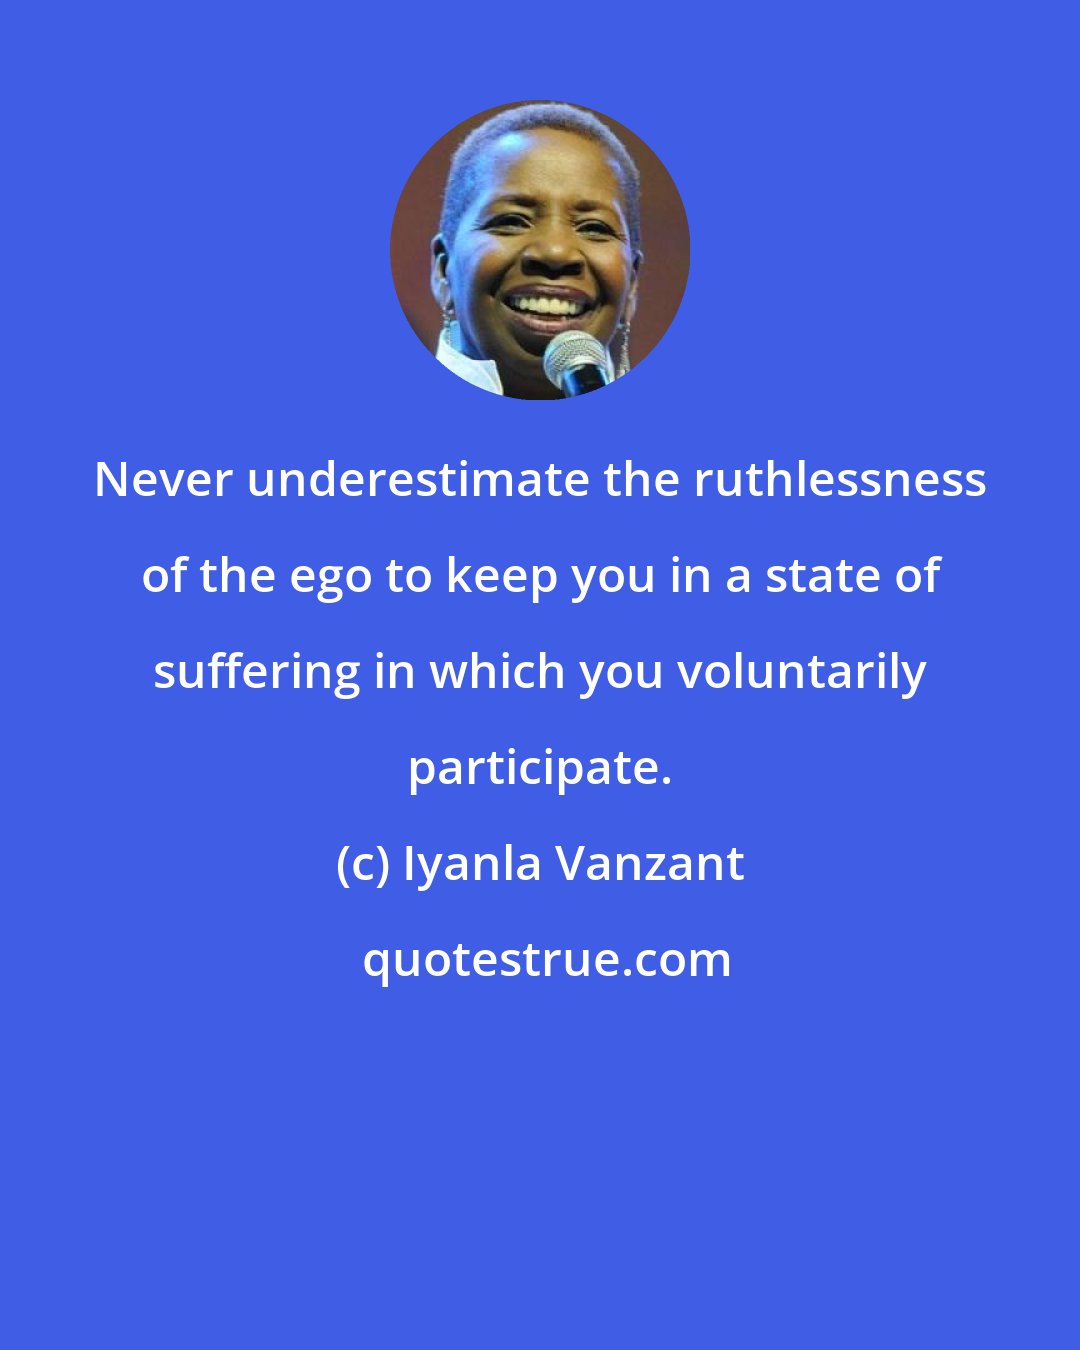 Iyanla Vanzant: Never underestimate the ruthlessness of the ego to keep you in a state of suffering in which you voluntarily participate.